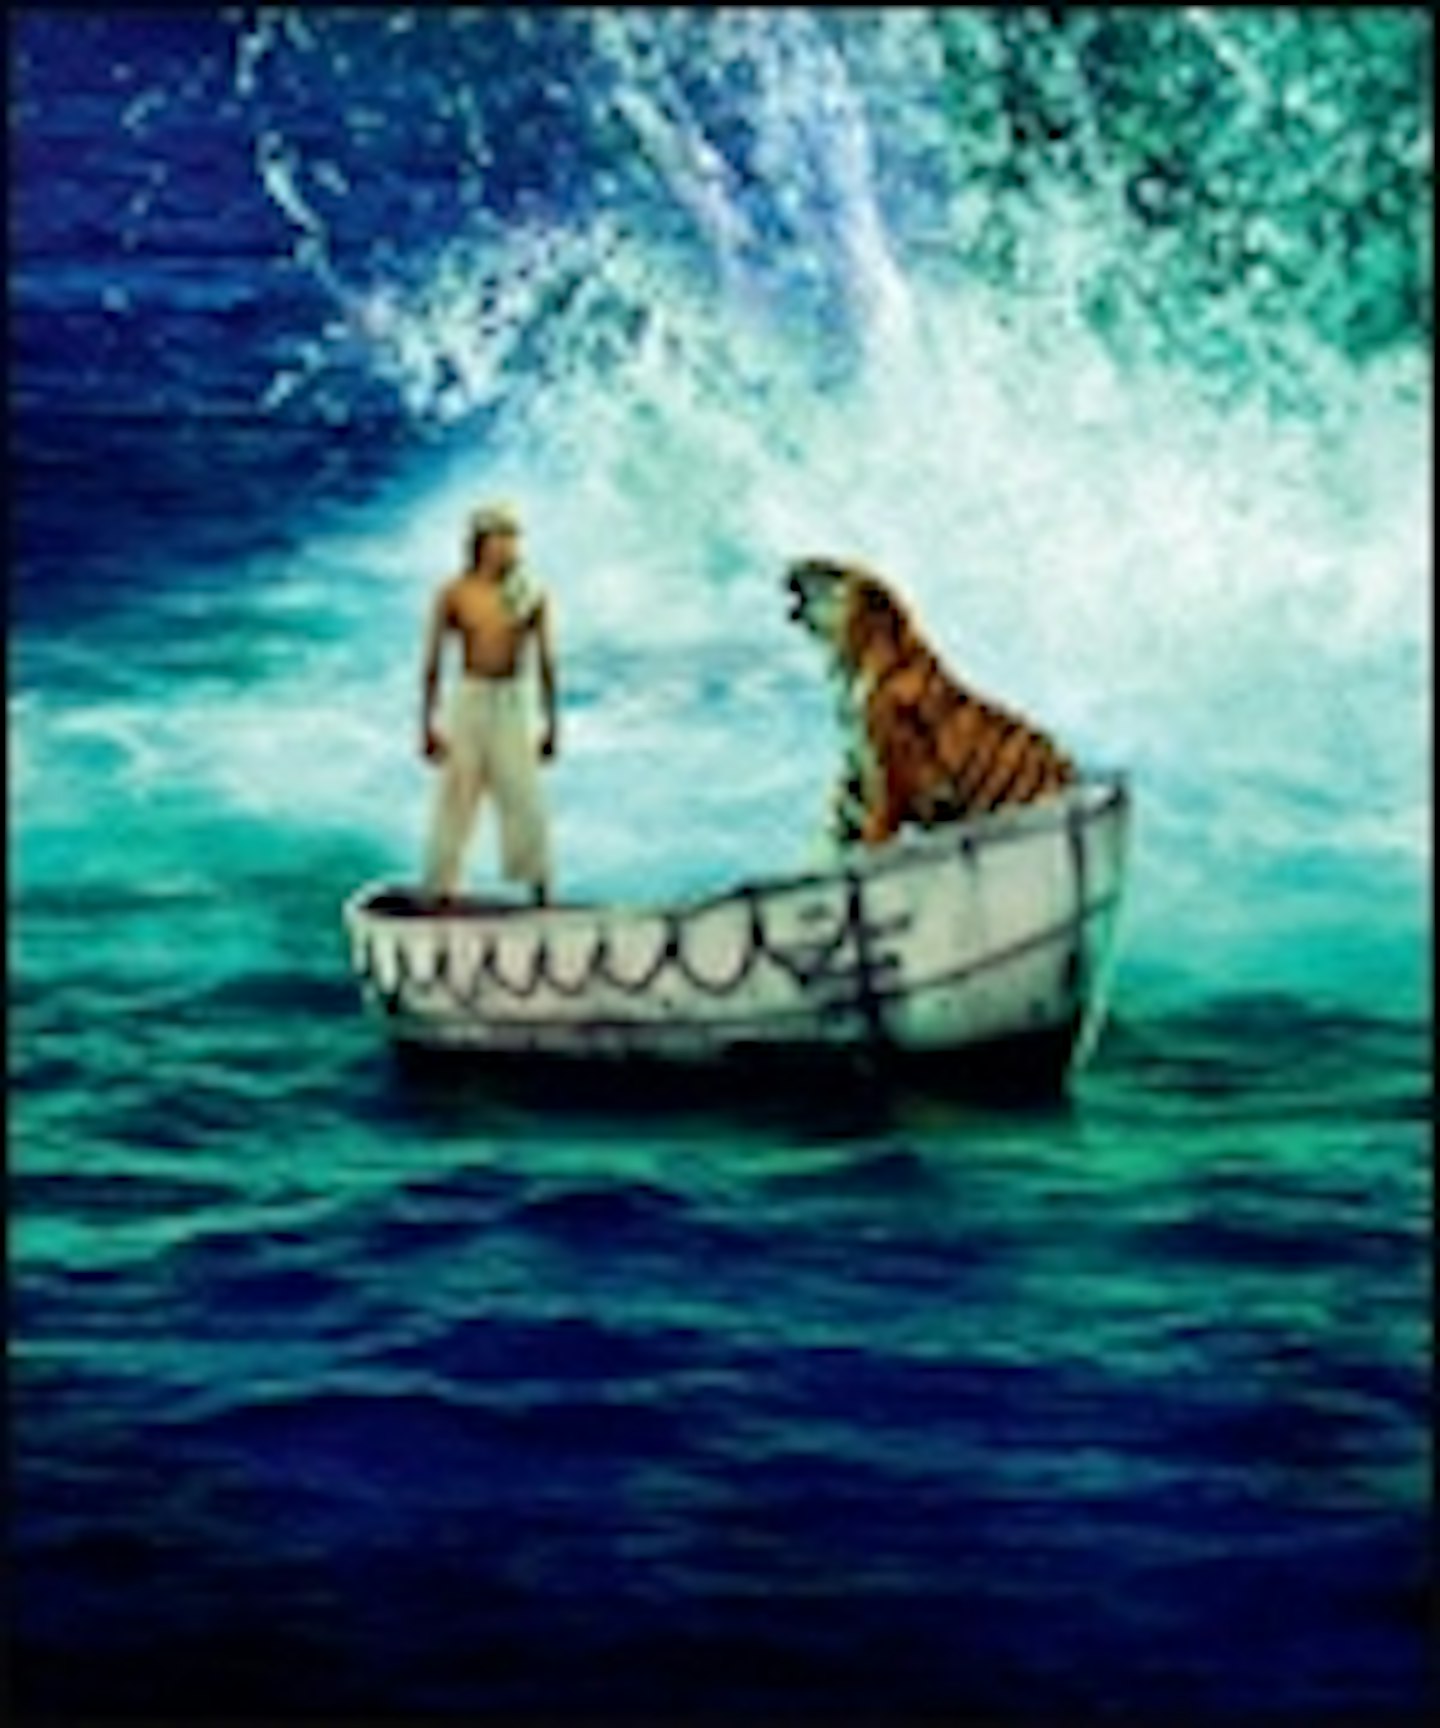 3 New Life Of Pi Posters Hit The Web